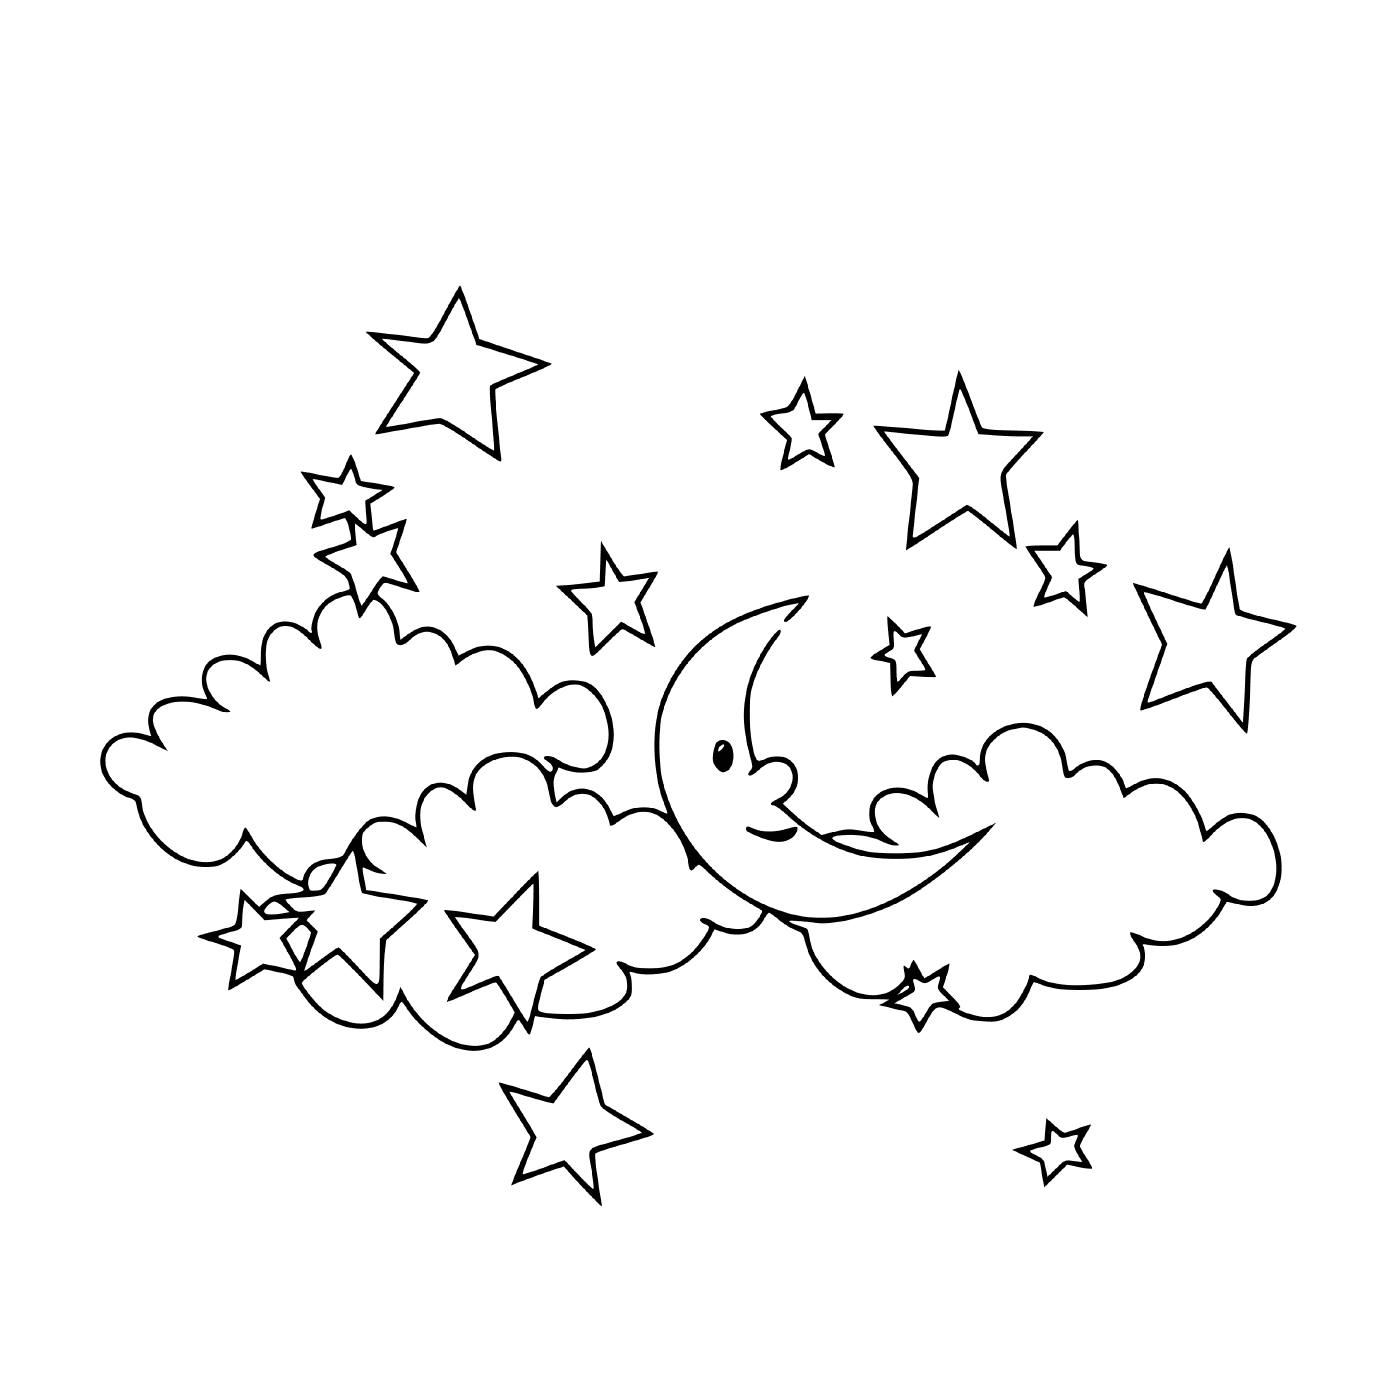  A moon and stars in the sky 